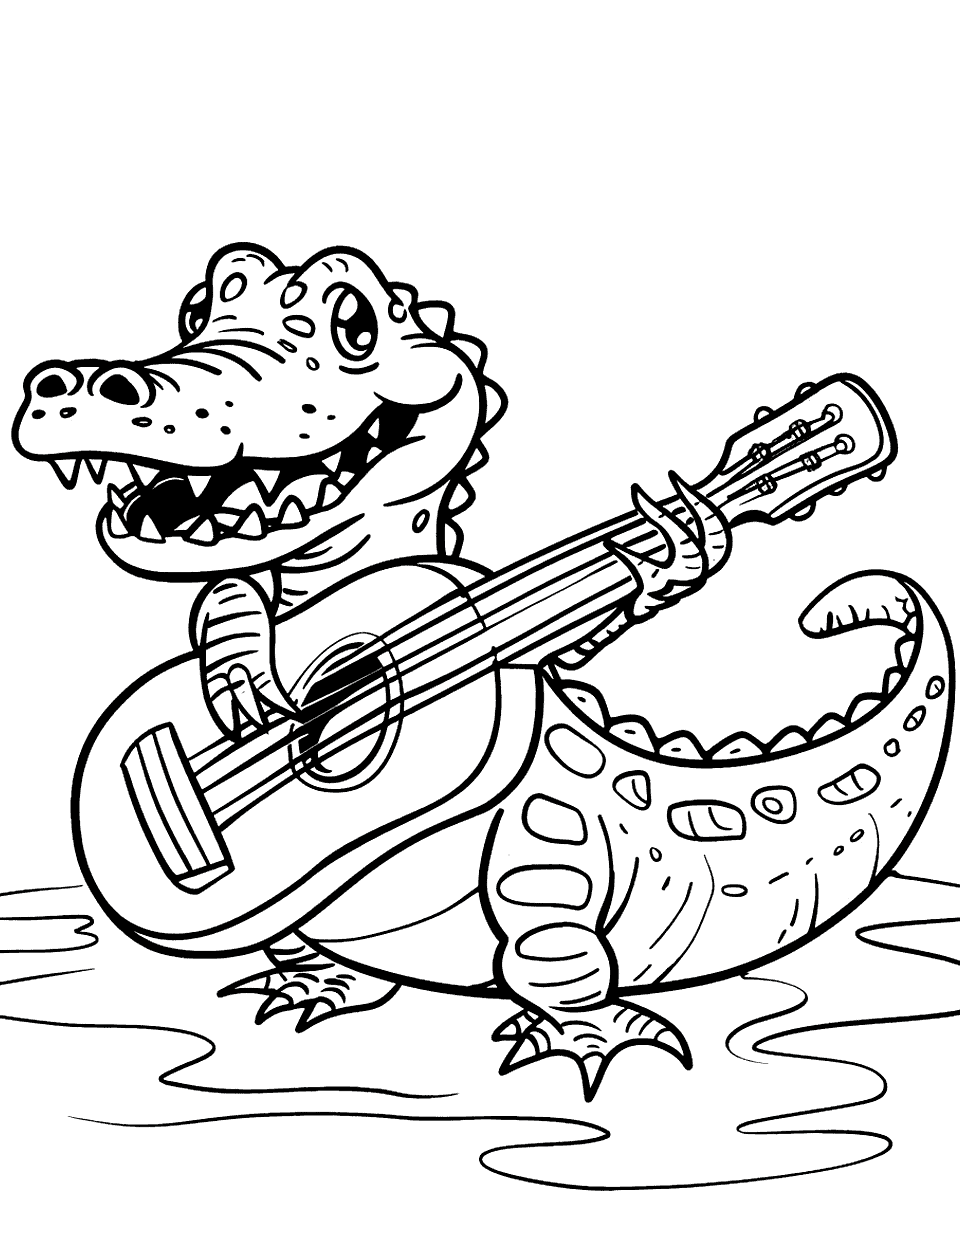 Alligator Playing a Guitar Coloring Page - An alligator strumming a guitar and singing.